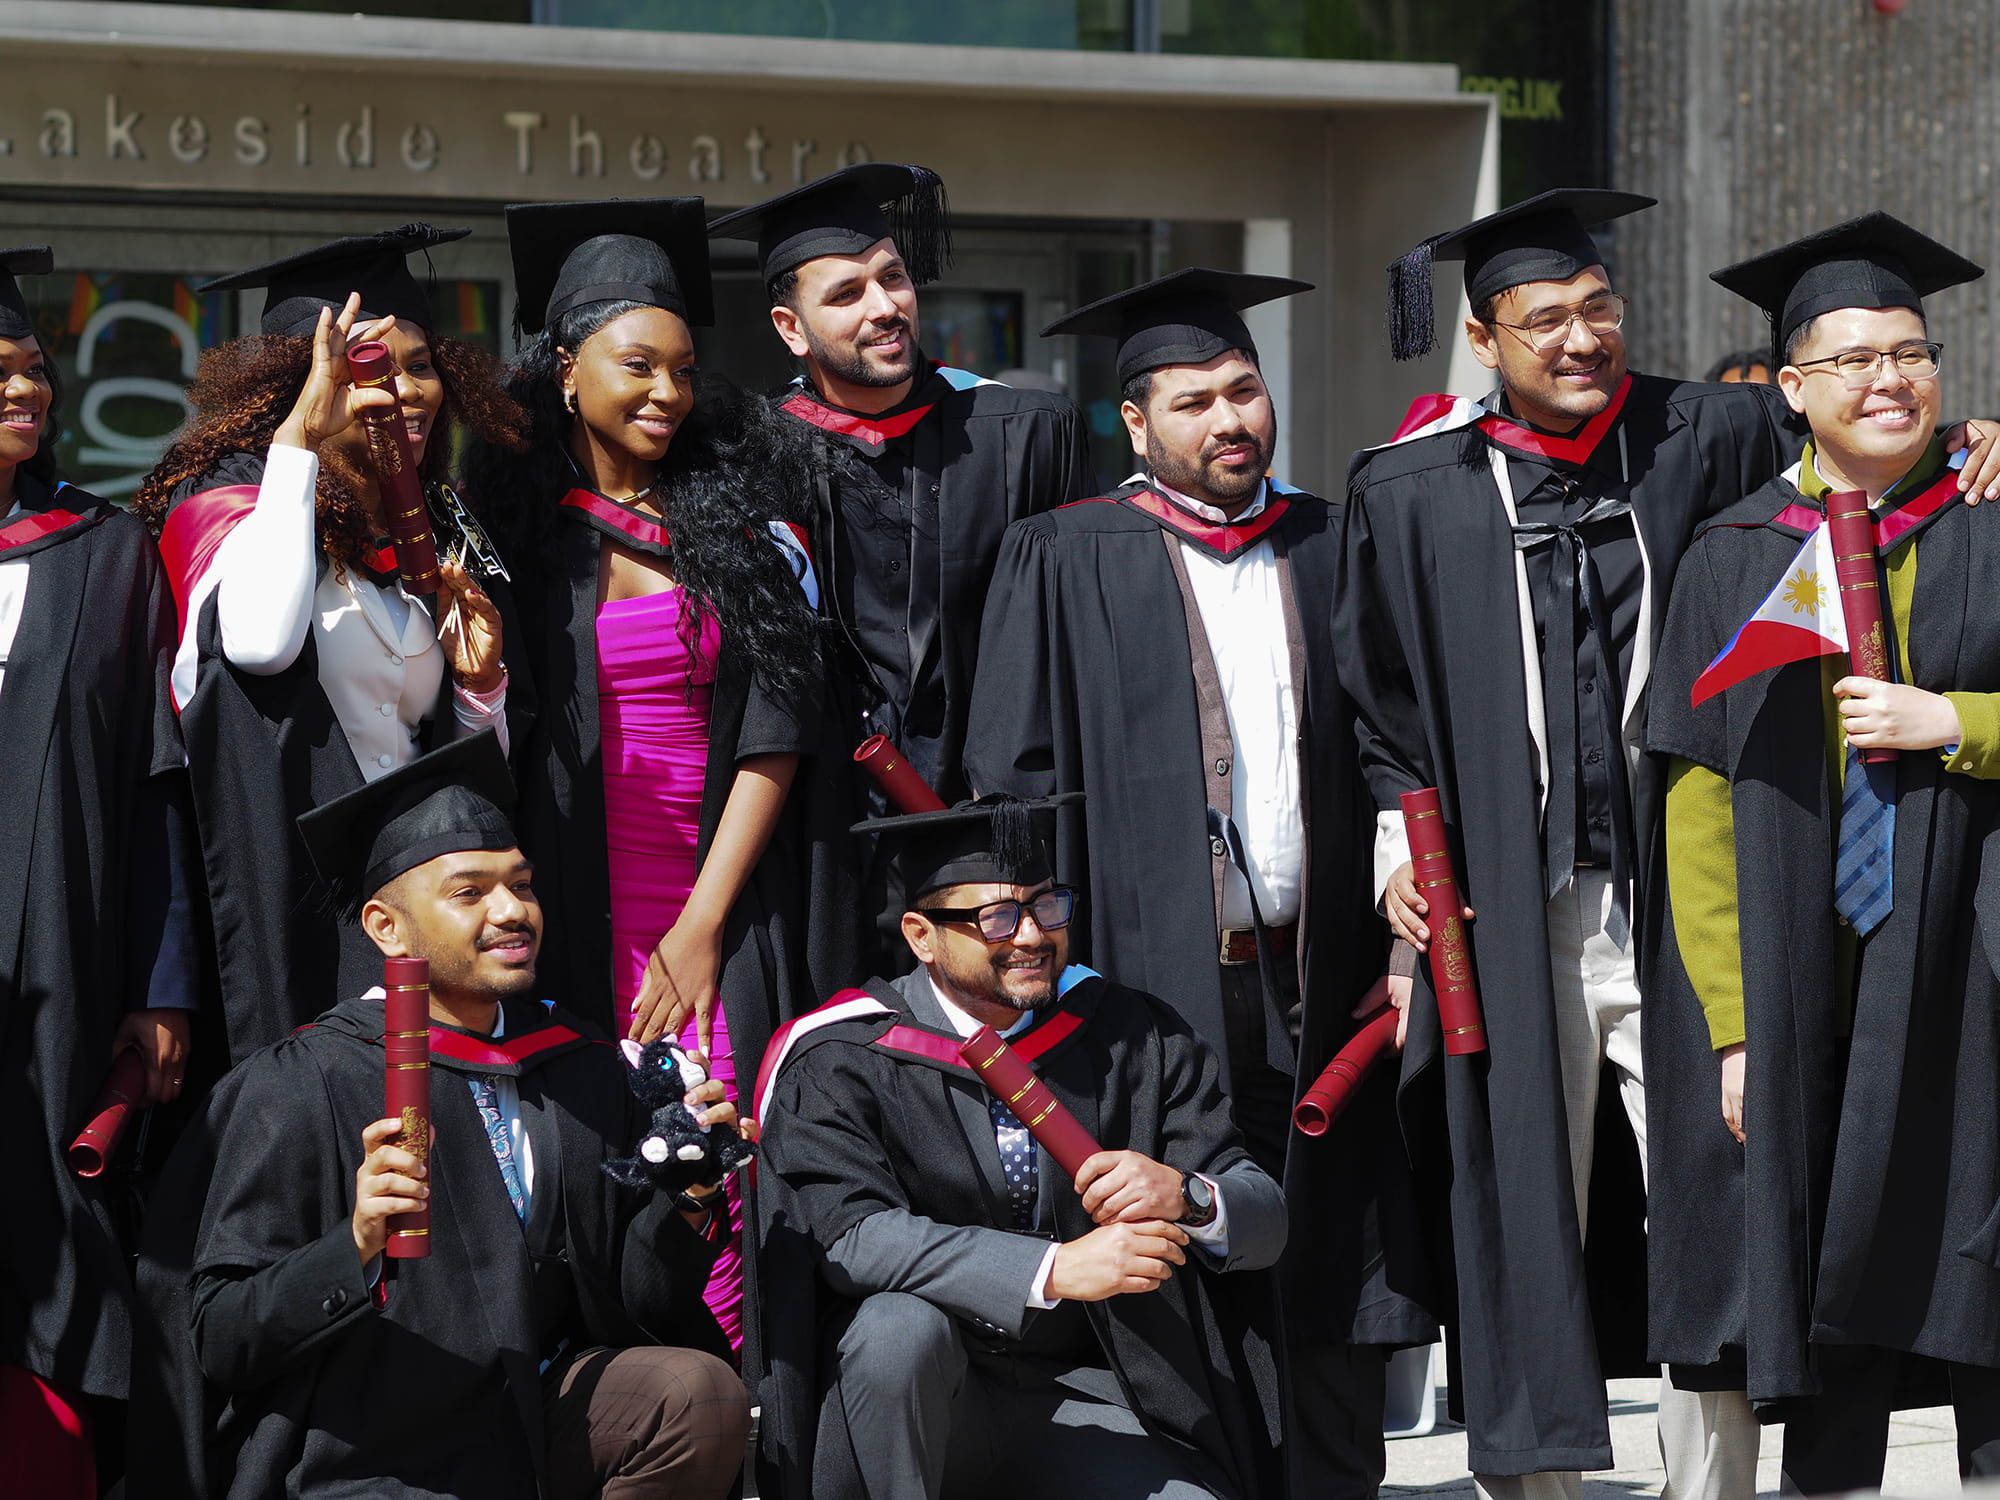 A group of graduates posing for a photo that's being taken out of shot. The smiling graduates are all dressed in black caps and gowns, holding their red diploma tubes. 